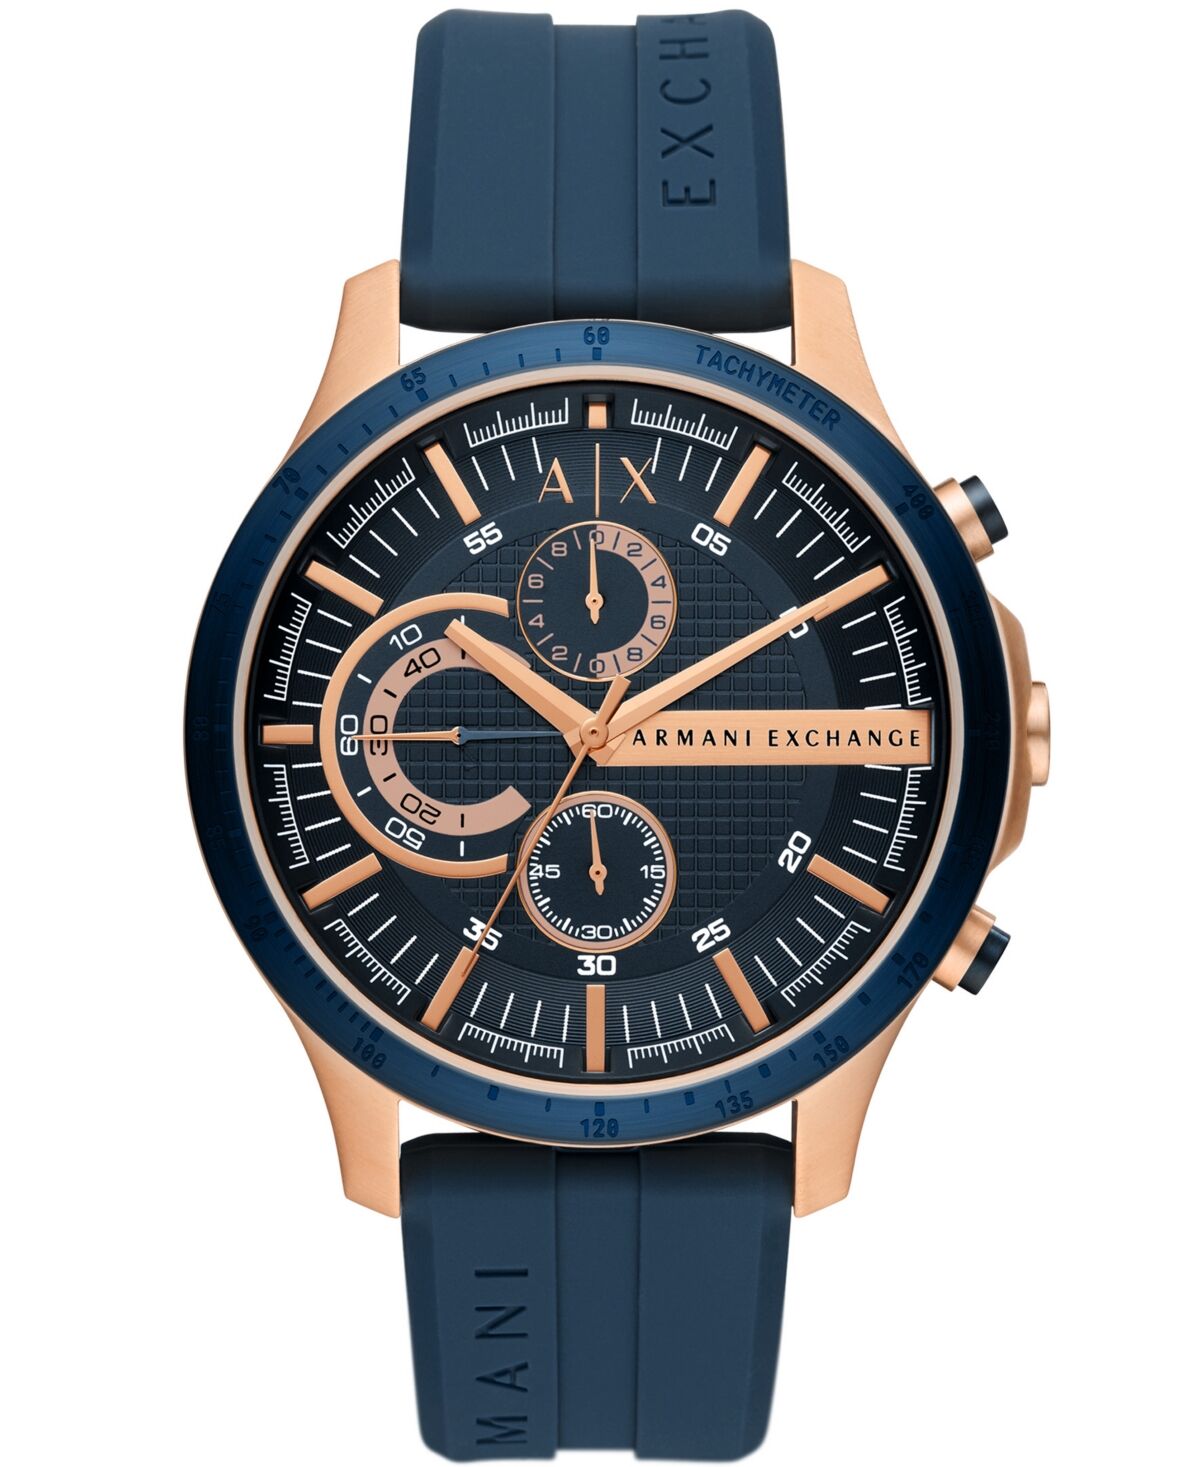 A|x Armani Exchange Men's Chronograph in Rose Gold-tone Plated Stainless Steel with Navy Silicone Strap Watch, 46mm - Navy